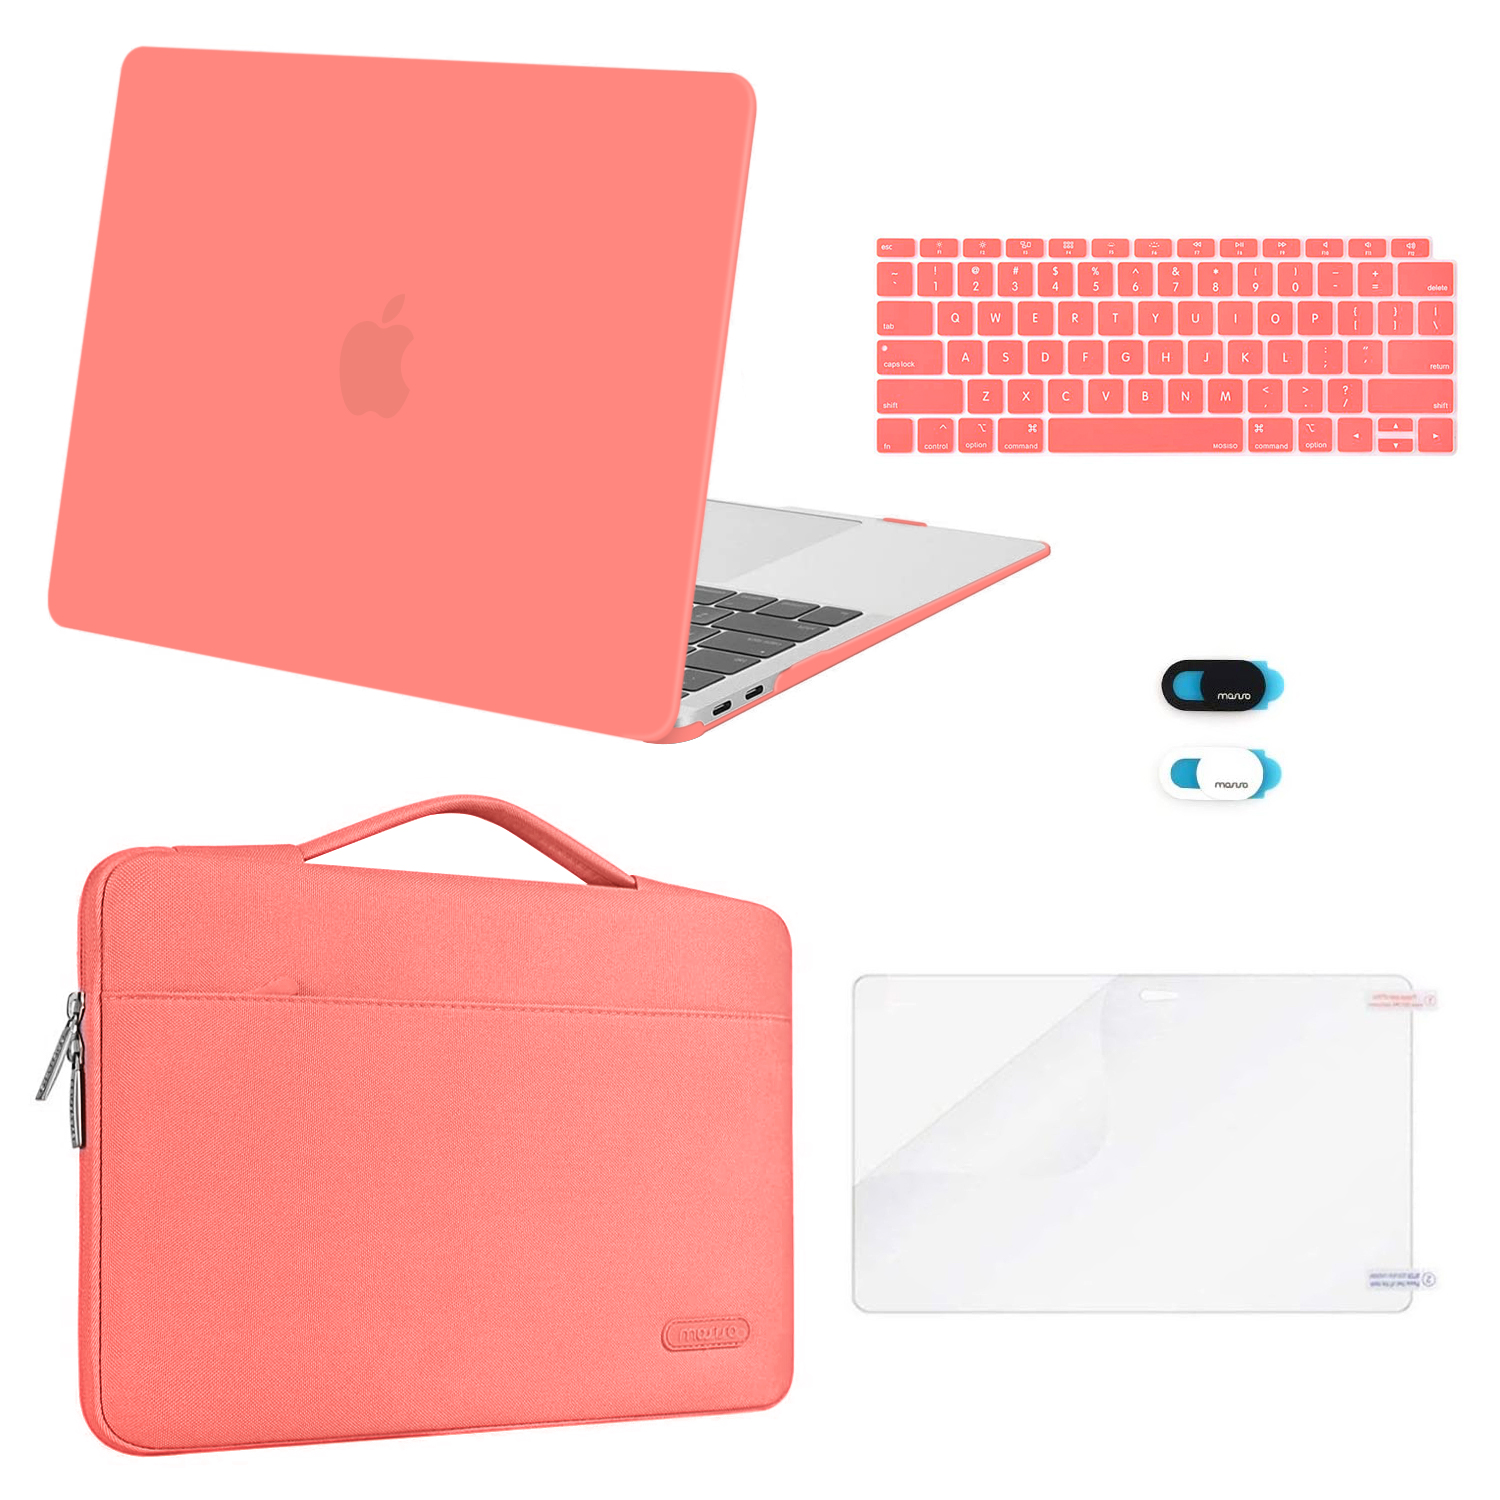 MacBook Air Case 13 Colorful Brignt Beautiful Rainbow Plastic Hard Shell Compatible Mac Air 11 Pro 13 15 Hard Laptop Cases Protection for MacBook 2016-2019 Version 